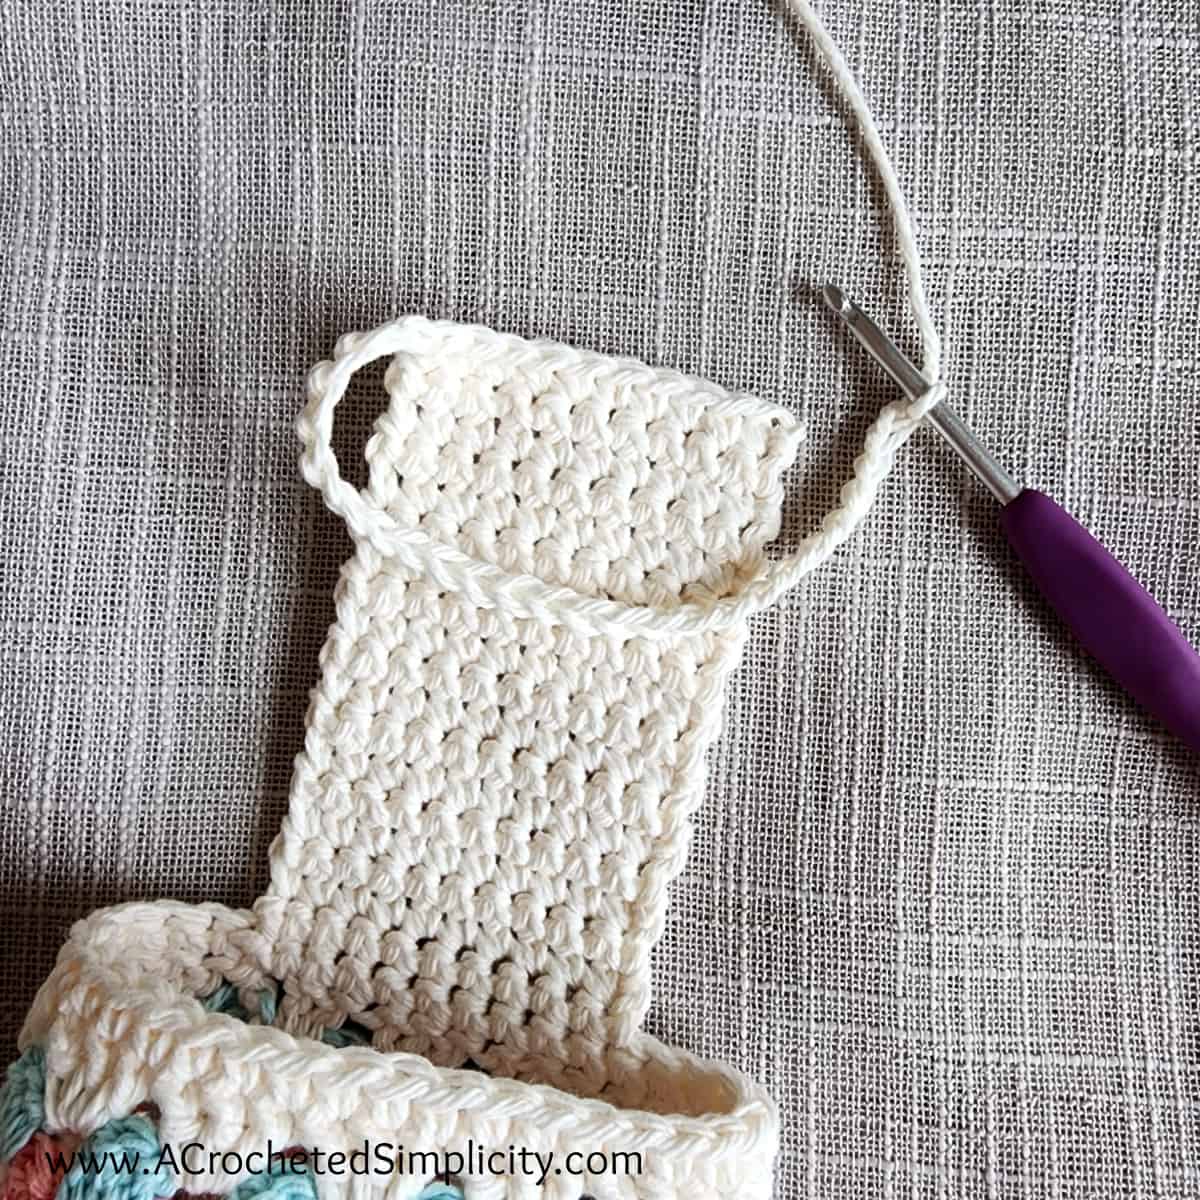 Crochet chain begins the cell phone pouch on a crochet chair caddy.